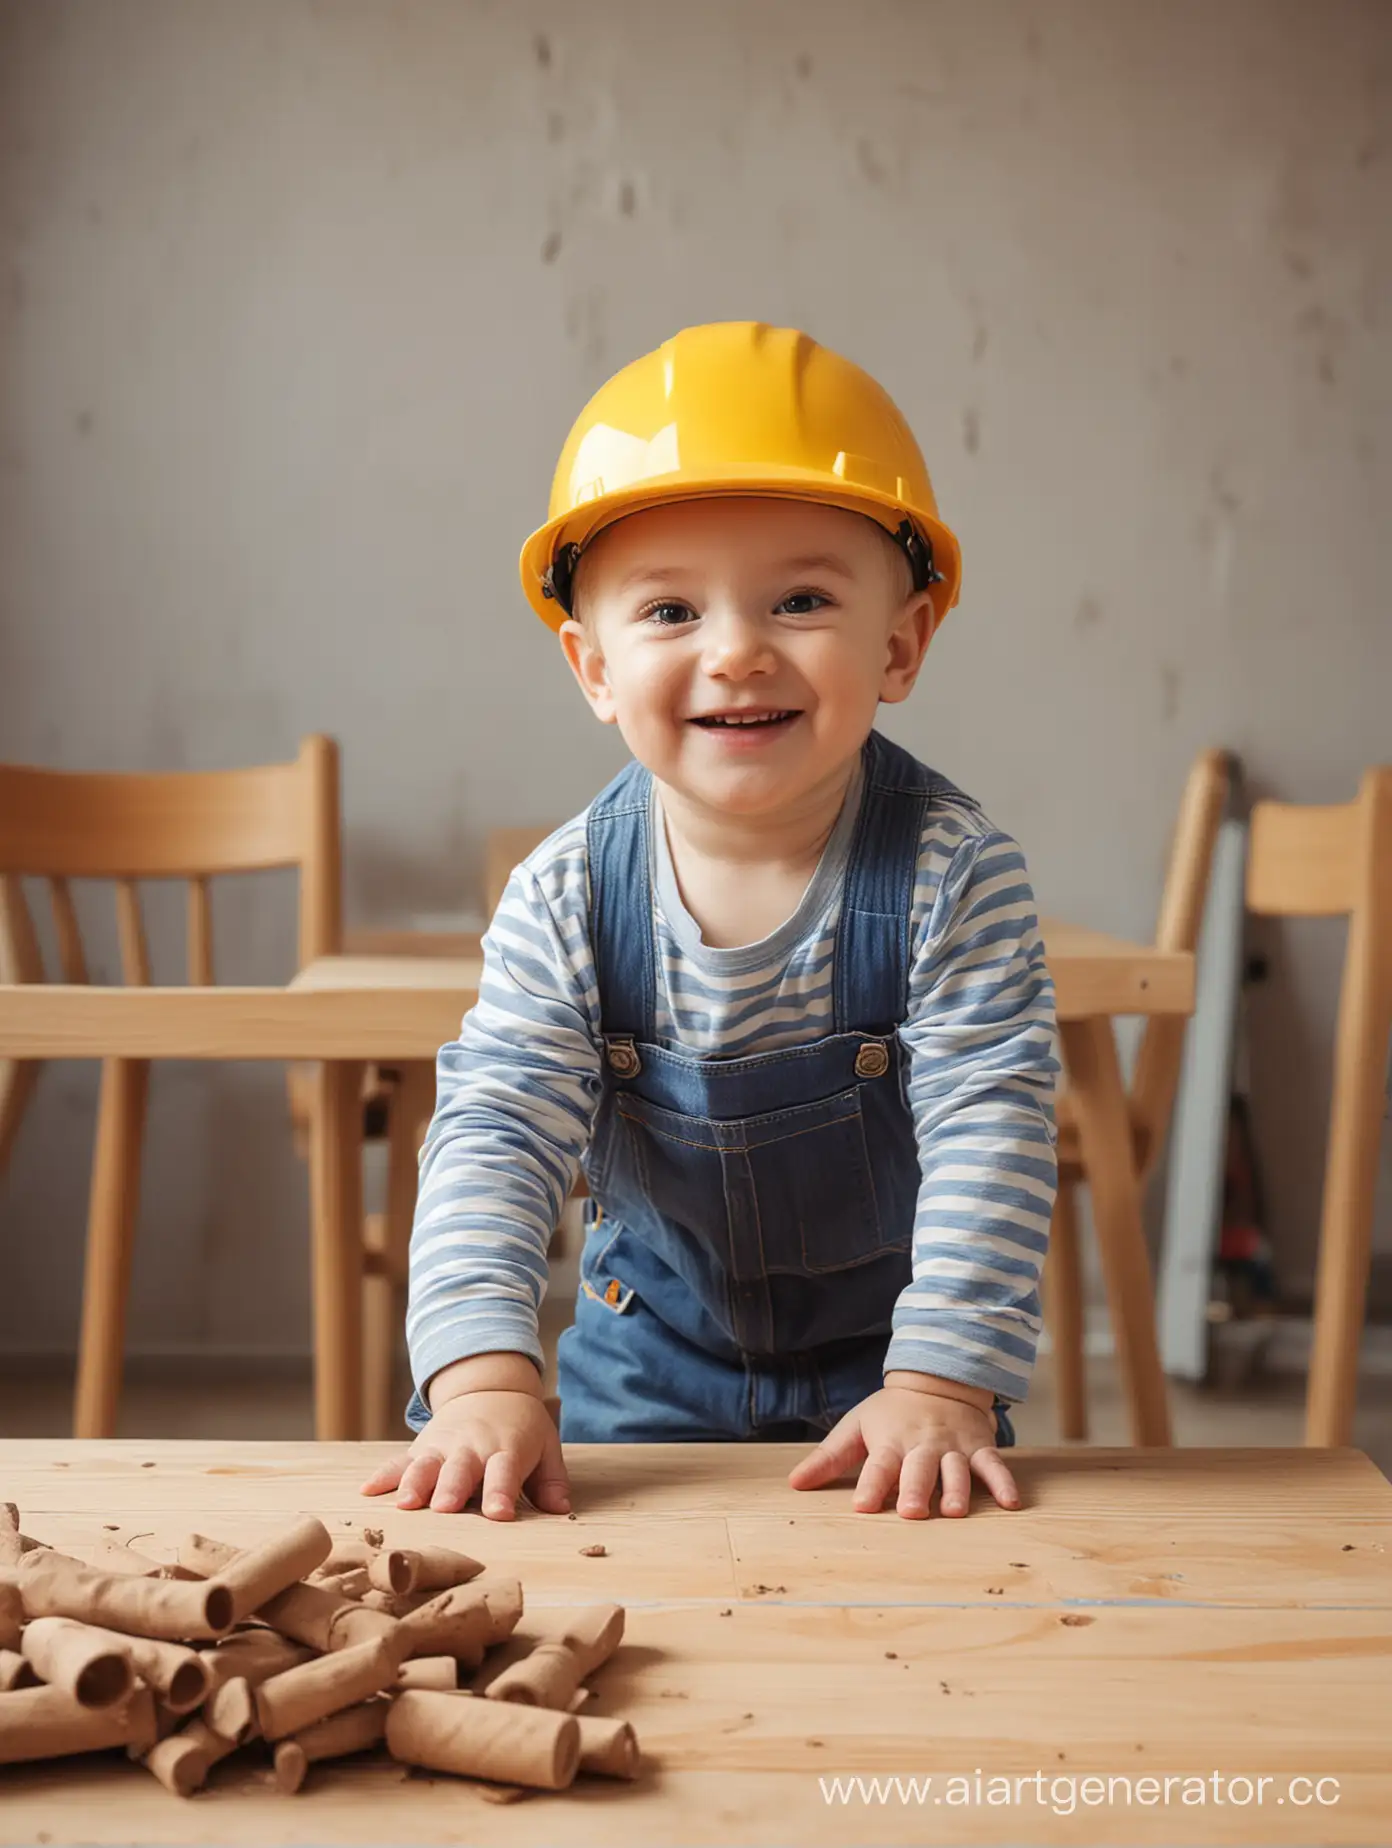 Cheerful-Young-Builder-at-Work-Joyful-Boy-in-Construction-Clothes-and-Cap